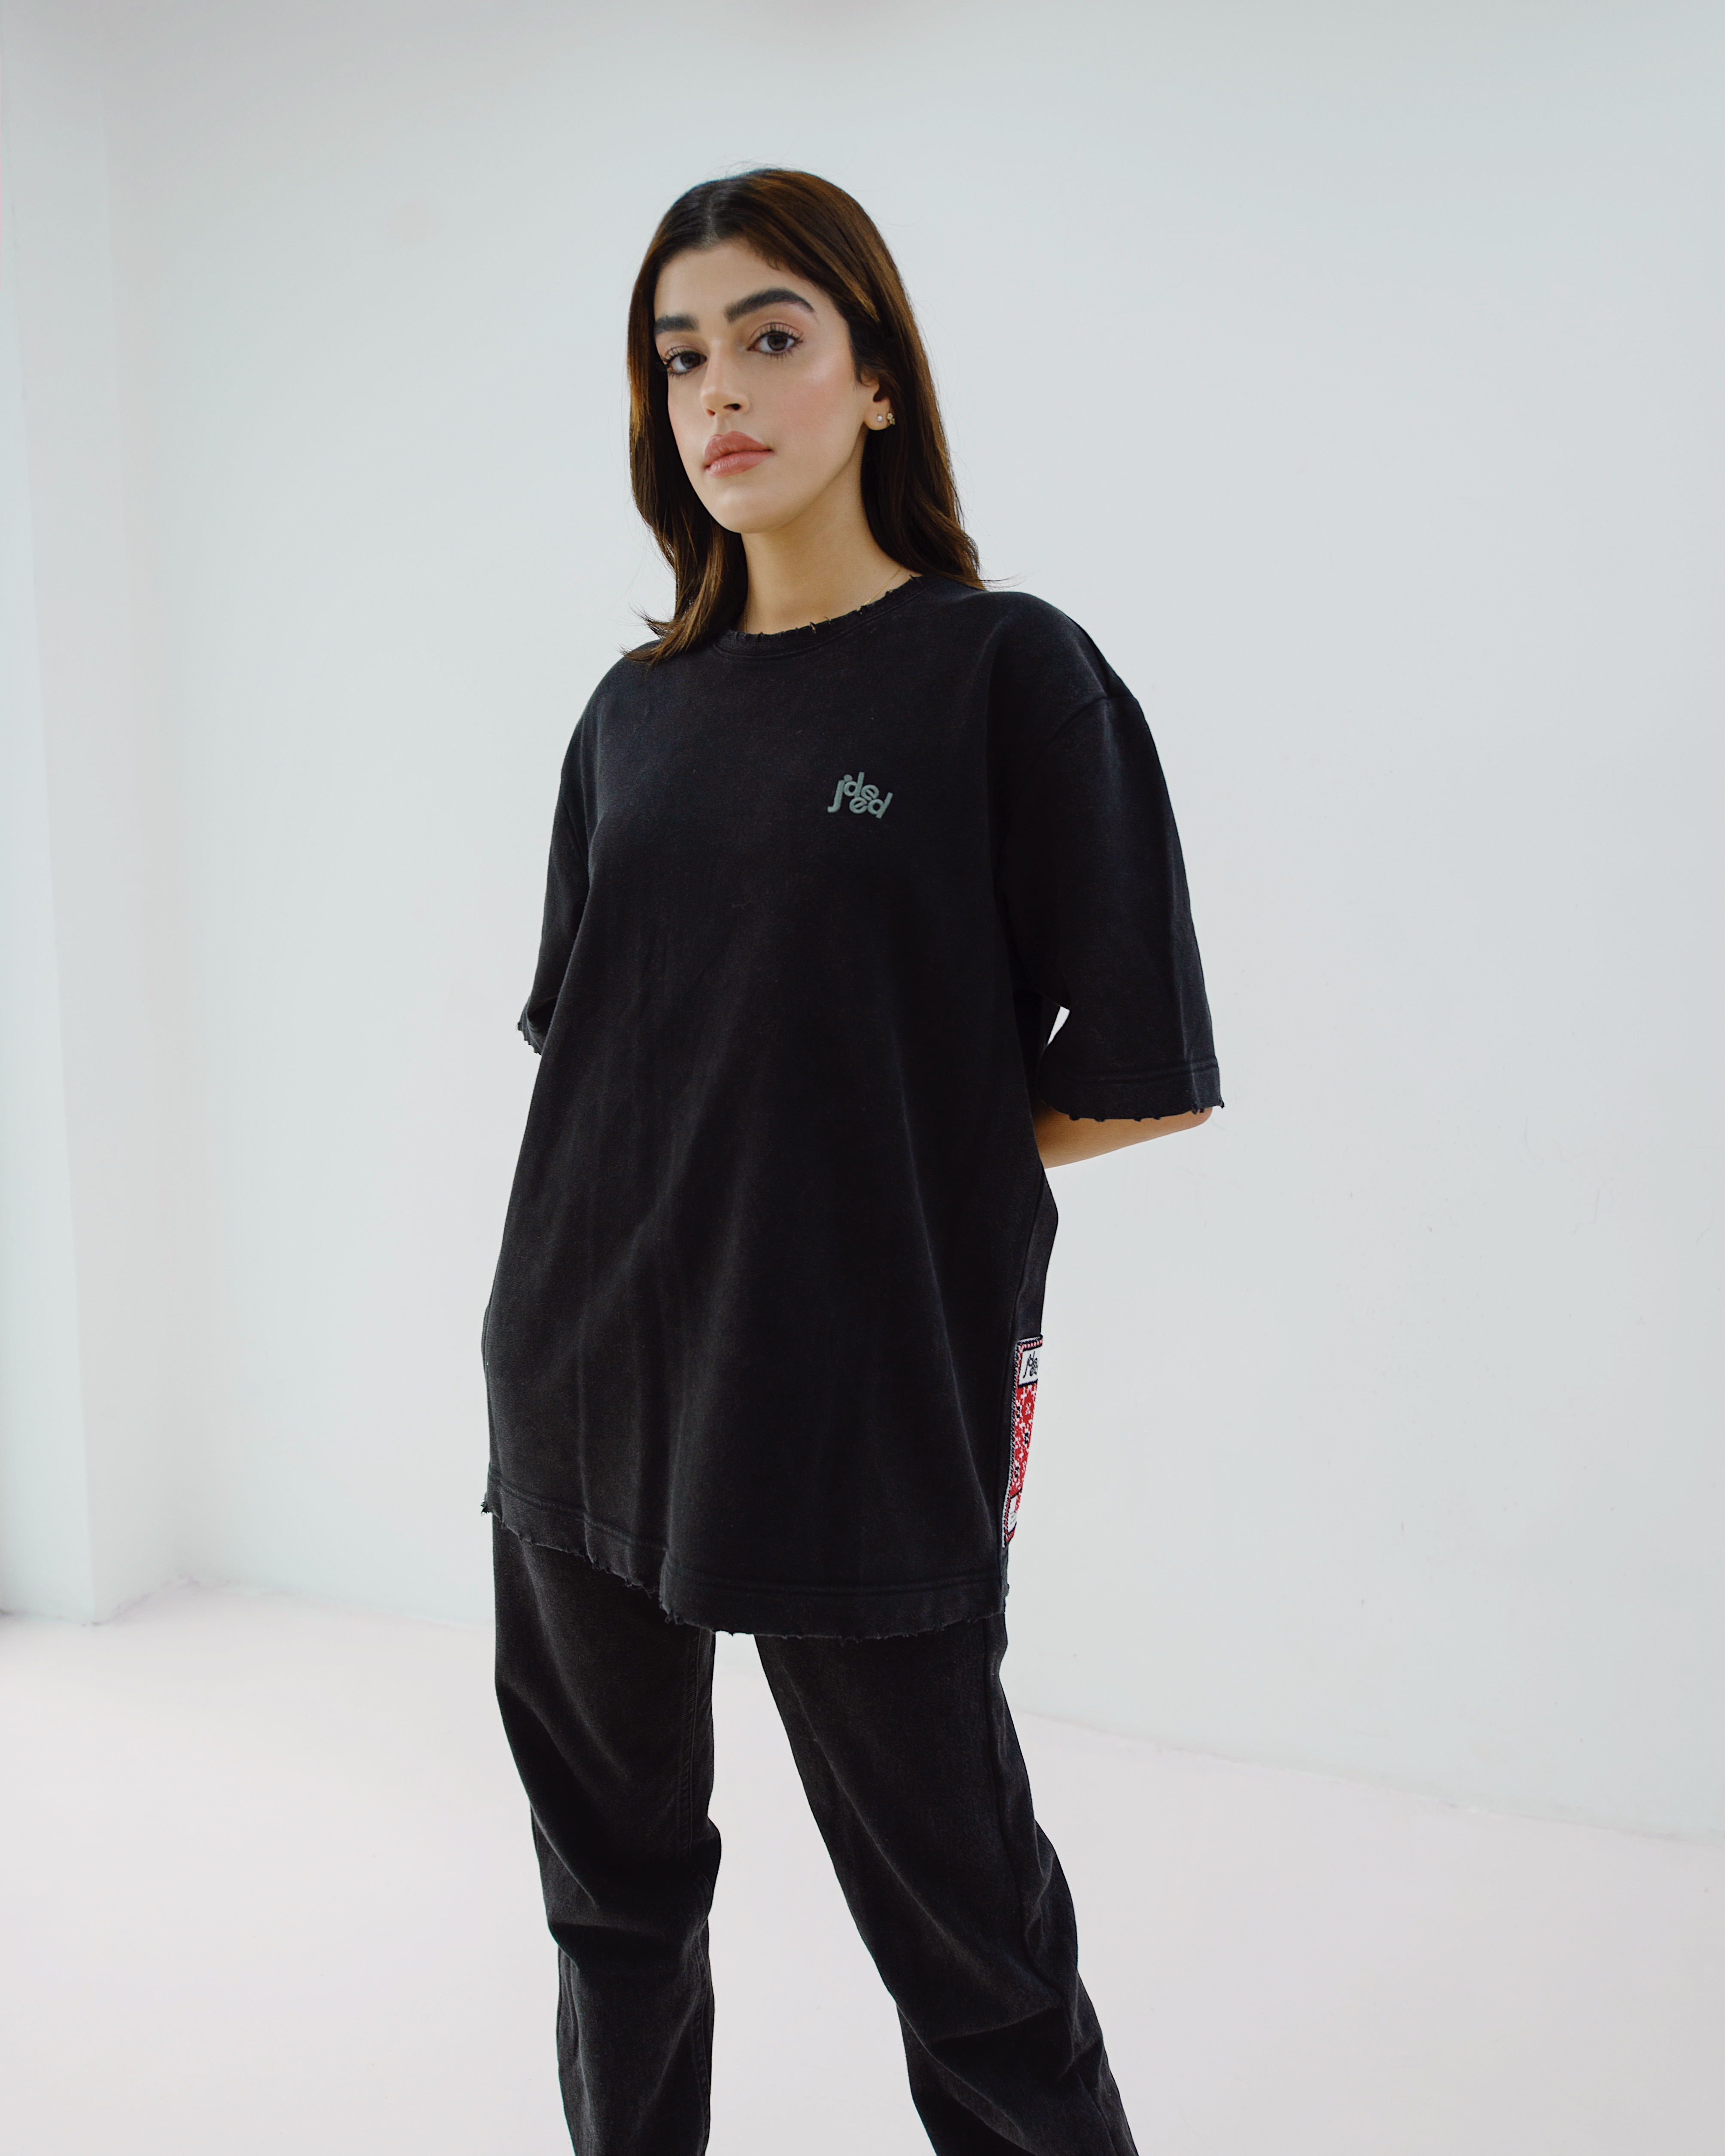 Jdeed | Second Collection Launch | Palestinian clothing brands to know